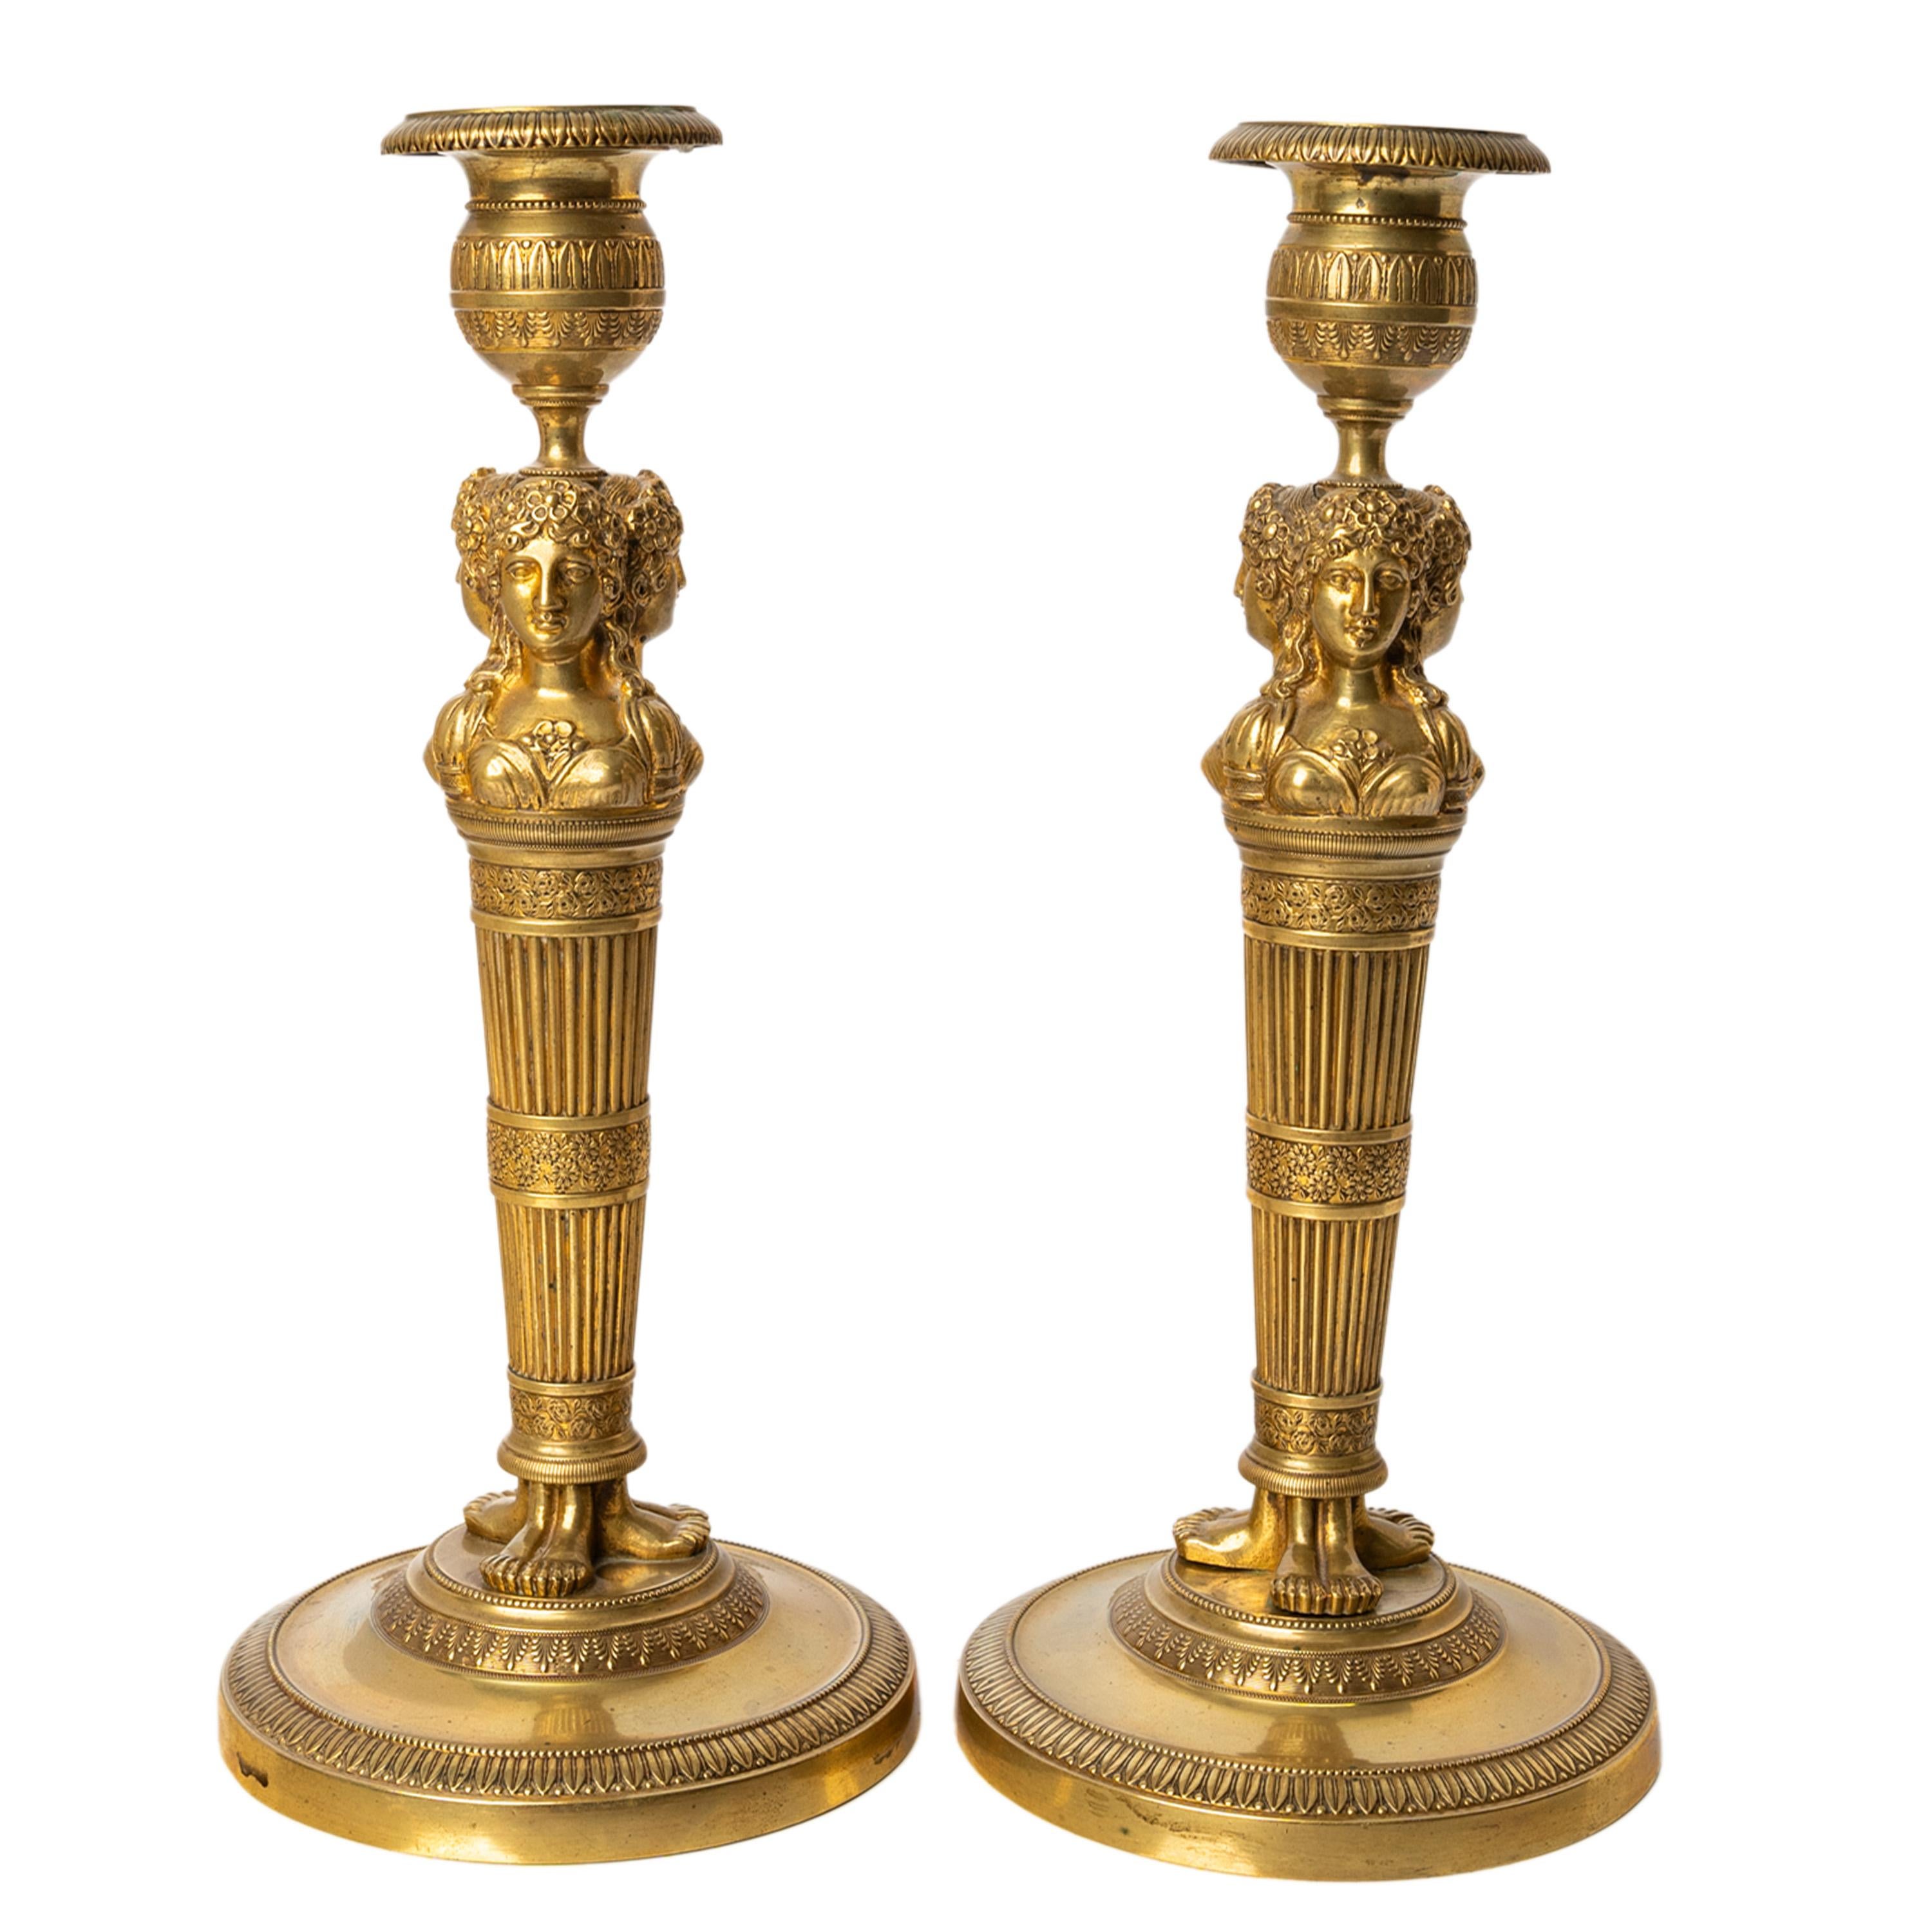 Pair Antique Early 19thC French Empire Neoclassical Gilt Bronze Candlesticks For Sale 1